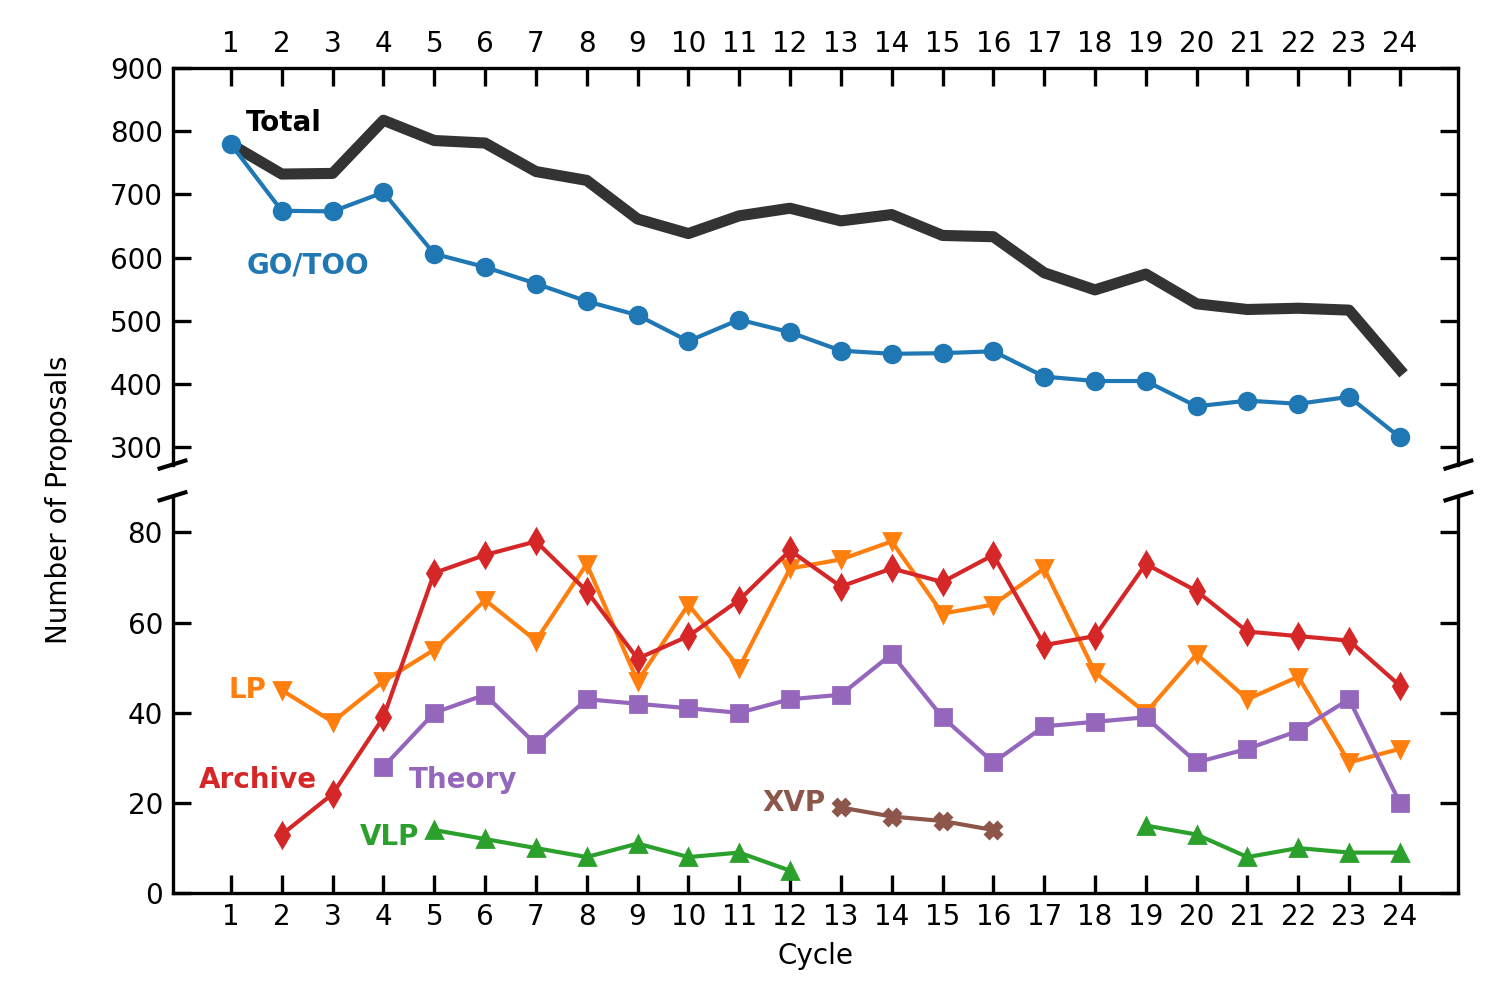 A line plot showing seven data trends. The X-Axis shows Chandra Proposal Cycle, from 1 to 24. TheY-Axis shows Number of proposals and has a break; the bottom of the axis is linear from 0 to just over 80, while the top of the axis starts at 300 and proceeds linearly to 900. The seven data sets and their colors are GO/TOO in blue, Theory in purple, Archive in red, LP in orange, XVP in brown, VLP in green, and Total in a thicker black line. GO/TOO and Total are the only data points in the top part of the axis; they start at around 800 in Cycle 1, slowly declining to 400 (Total) and 300 (GO/TOO) in Cycle 24. On the bottom, Archive quickly rises from Cycle 2, reaching a steady value of around 80 by Cycle 5. LP, starting in Cycle 2, and Theory, starting in Cycle 4, remain relatively consistent throughout, at roughly 60 and roughly 40 proposals per cycle, respectively. VLPs decline from their introduction in Cycle 5 to only a few in Cycle 12; in Cycle 13, there are no VLPs, only XVPs, which remain at roughly 20, with a gradual decline over the four cycles they are present. VLPs reappear in Cycle 19, staying constant at around 10 per year.